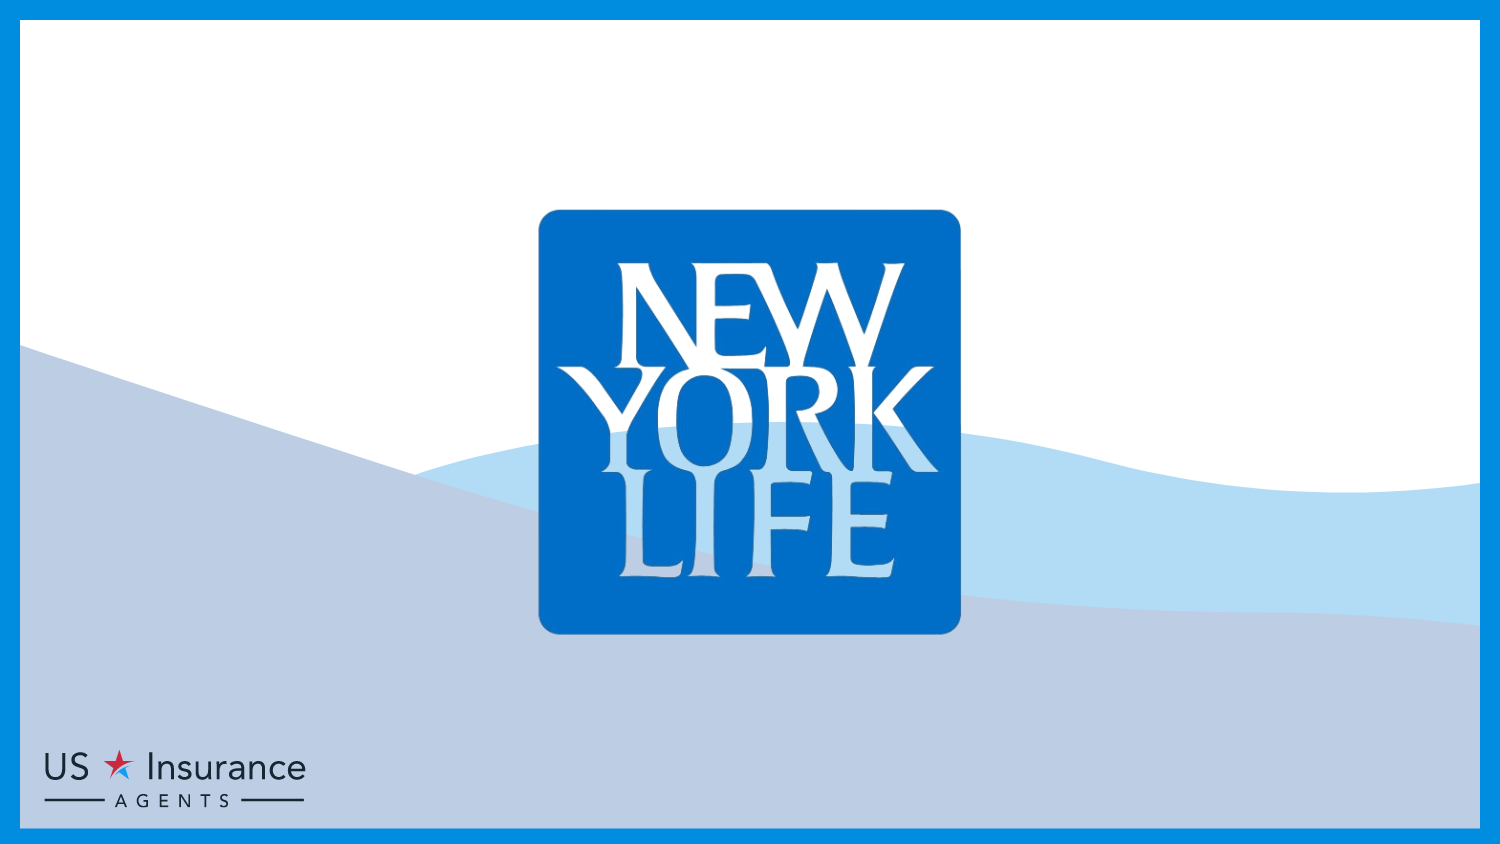 New York Life: Best Life Insurance for Overweight People